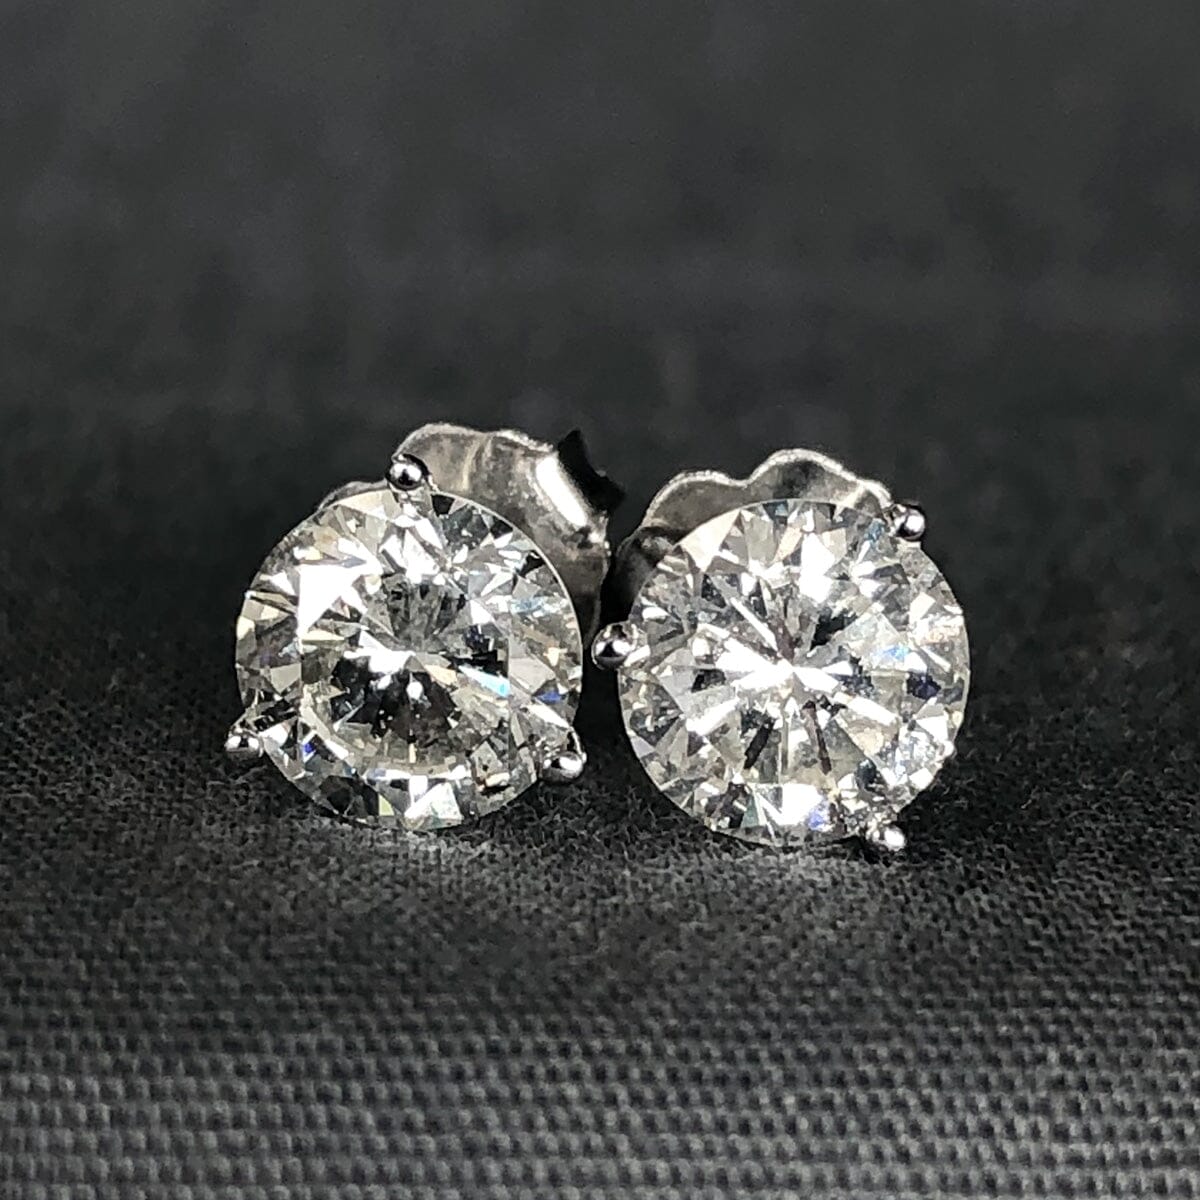 Great Lakes Boutique White Gold Diamond Stud Earrings (1.75 Carat)